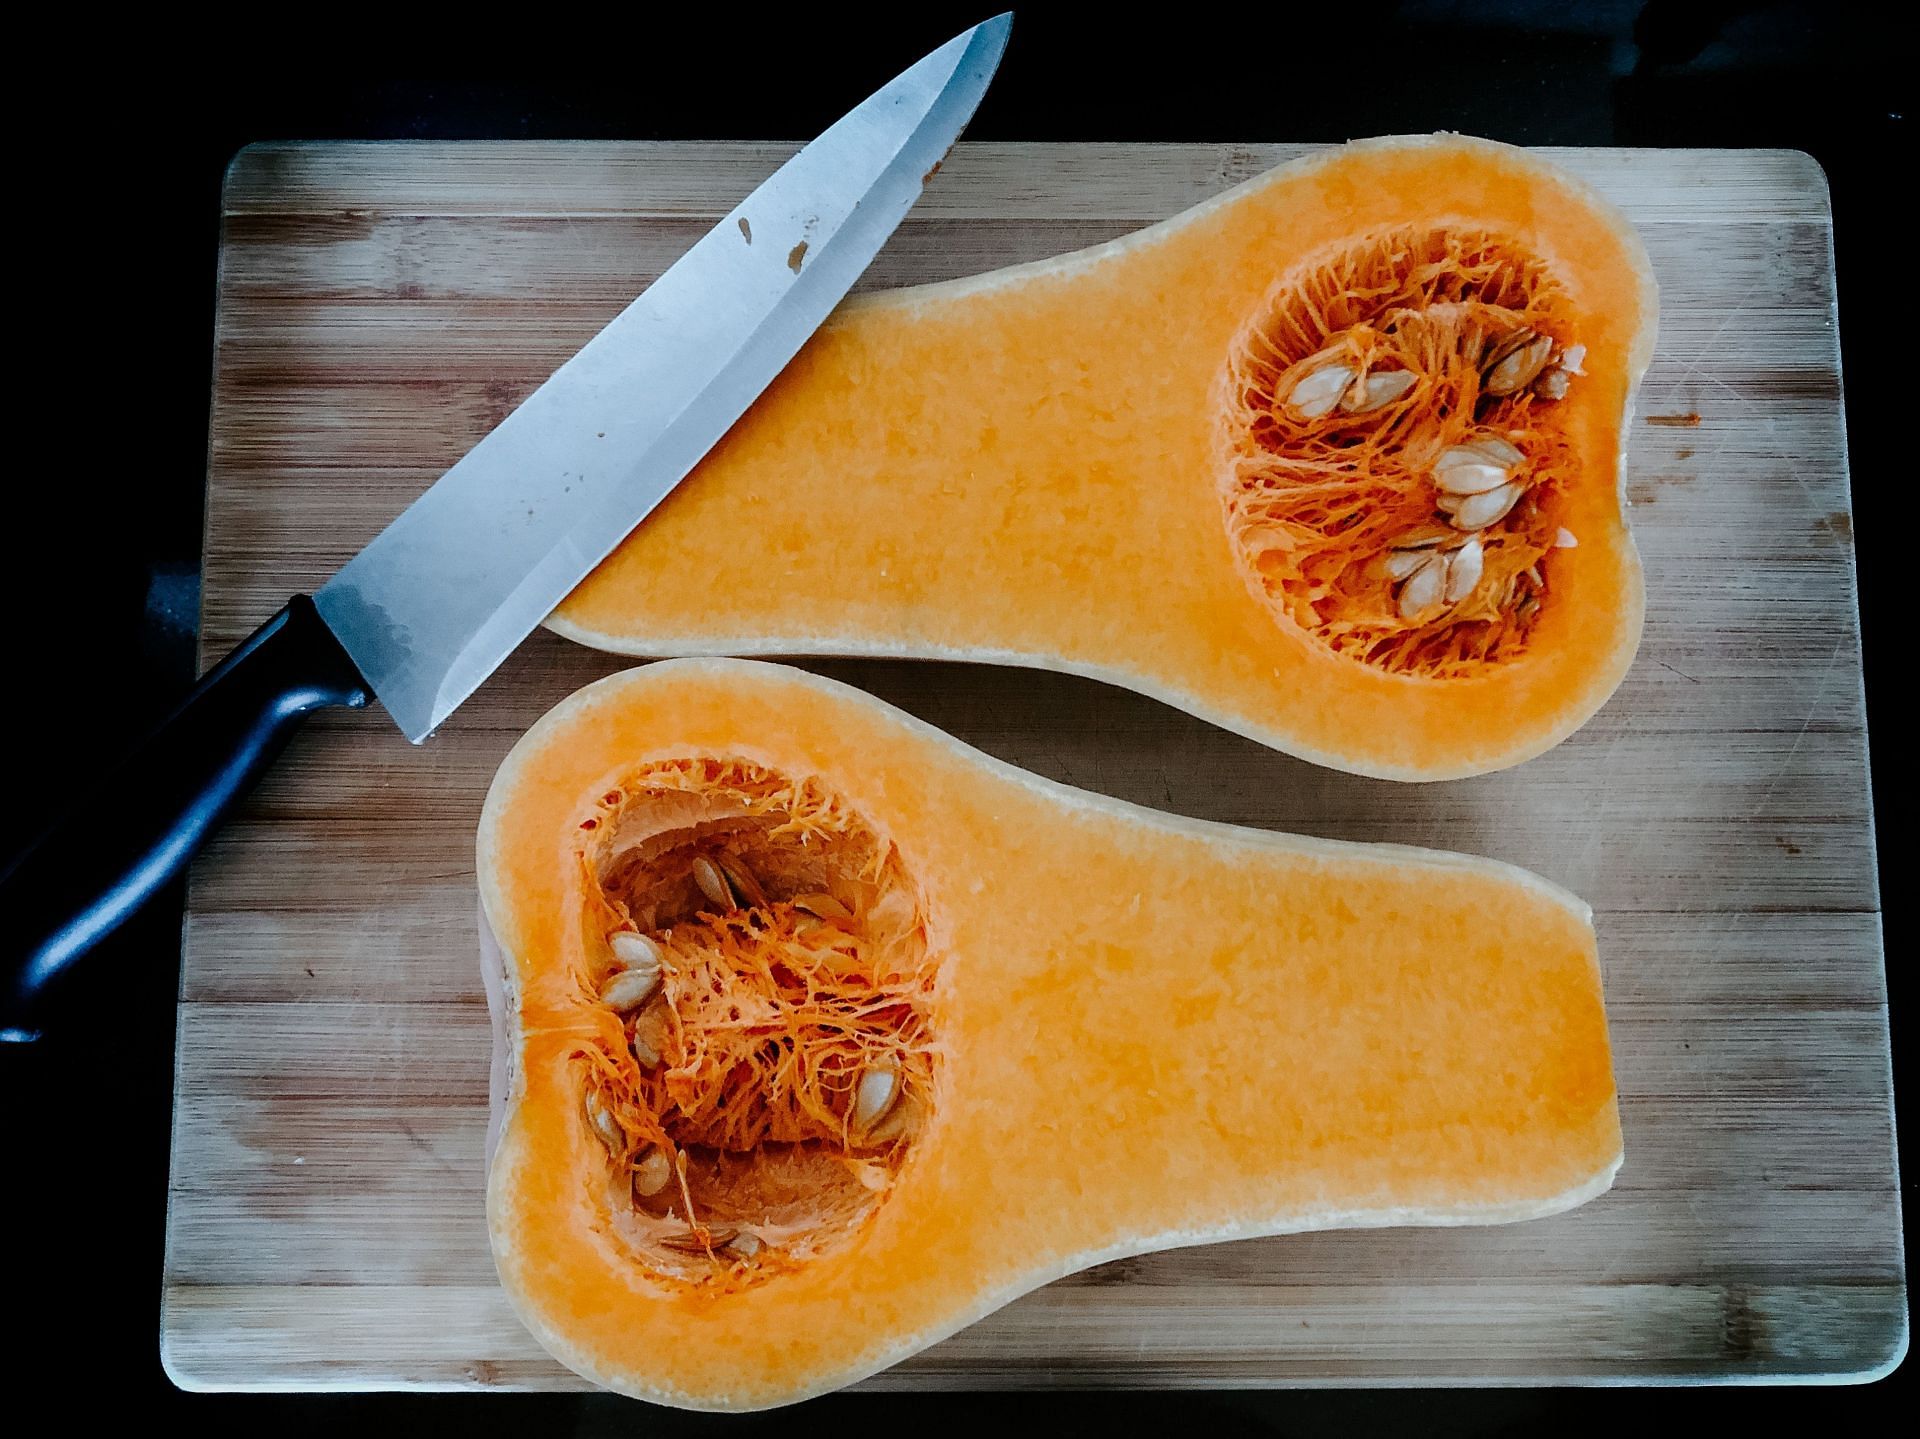 Butternut squash, one of the most liked winter squash kinds, is readily available throughout the year. (Image via Unsplash/ Viviana Rishe)